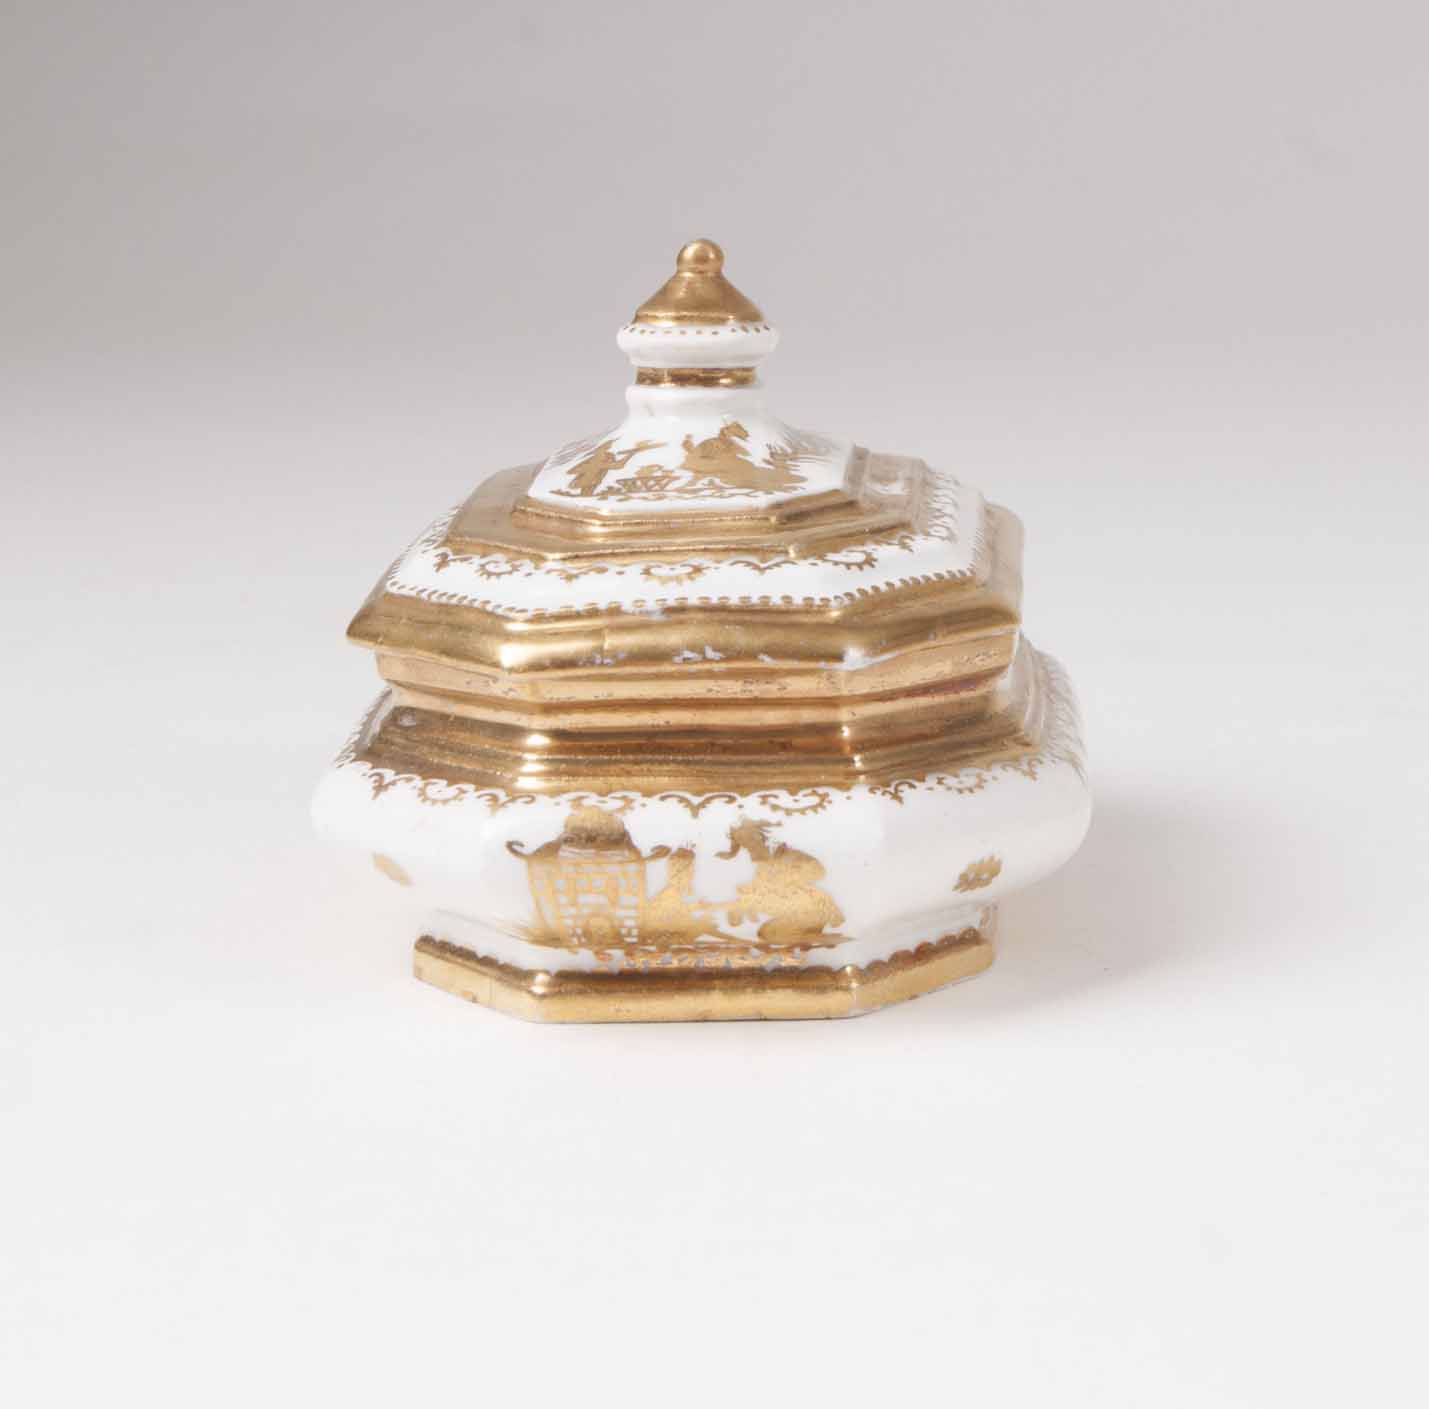 A rare Böttger sugar-box with gold chinoiseries from Augsburg - image 5